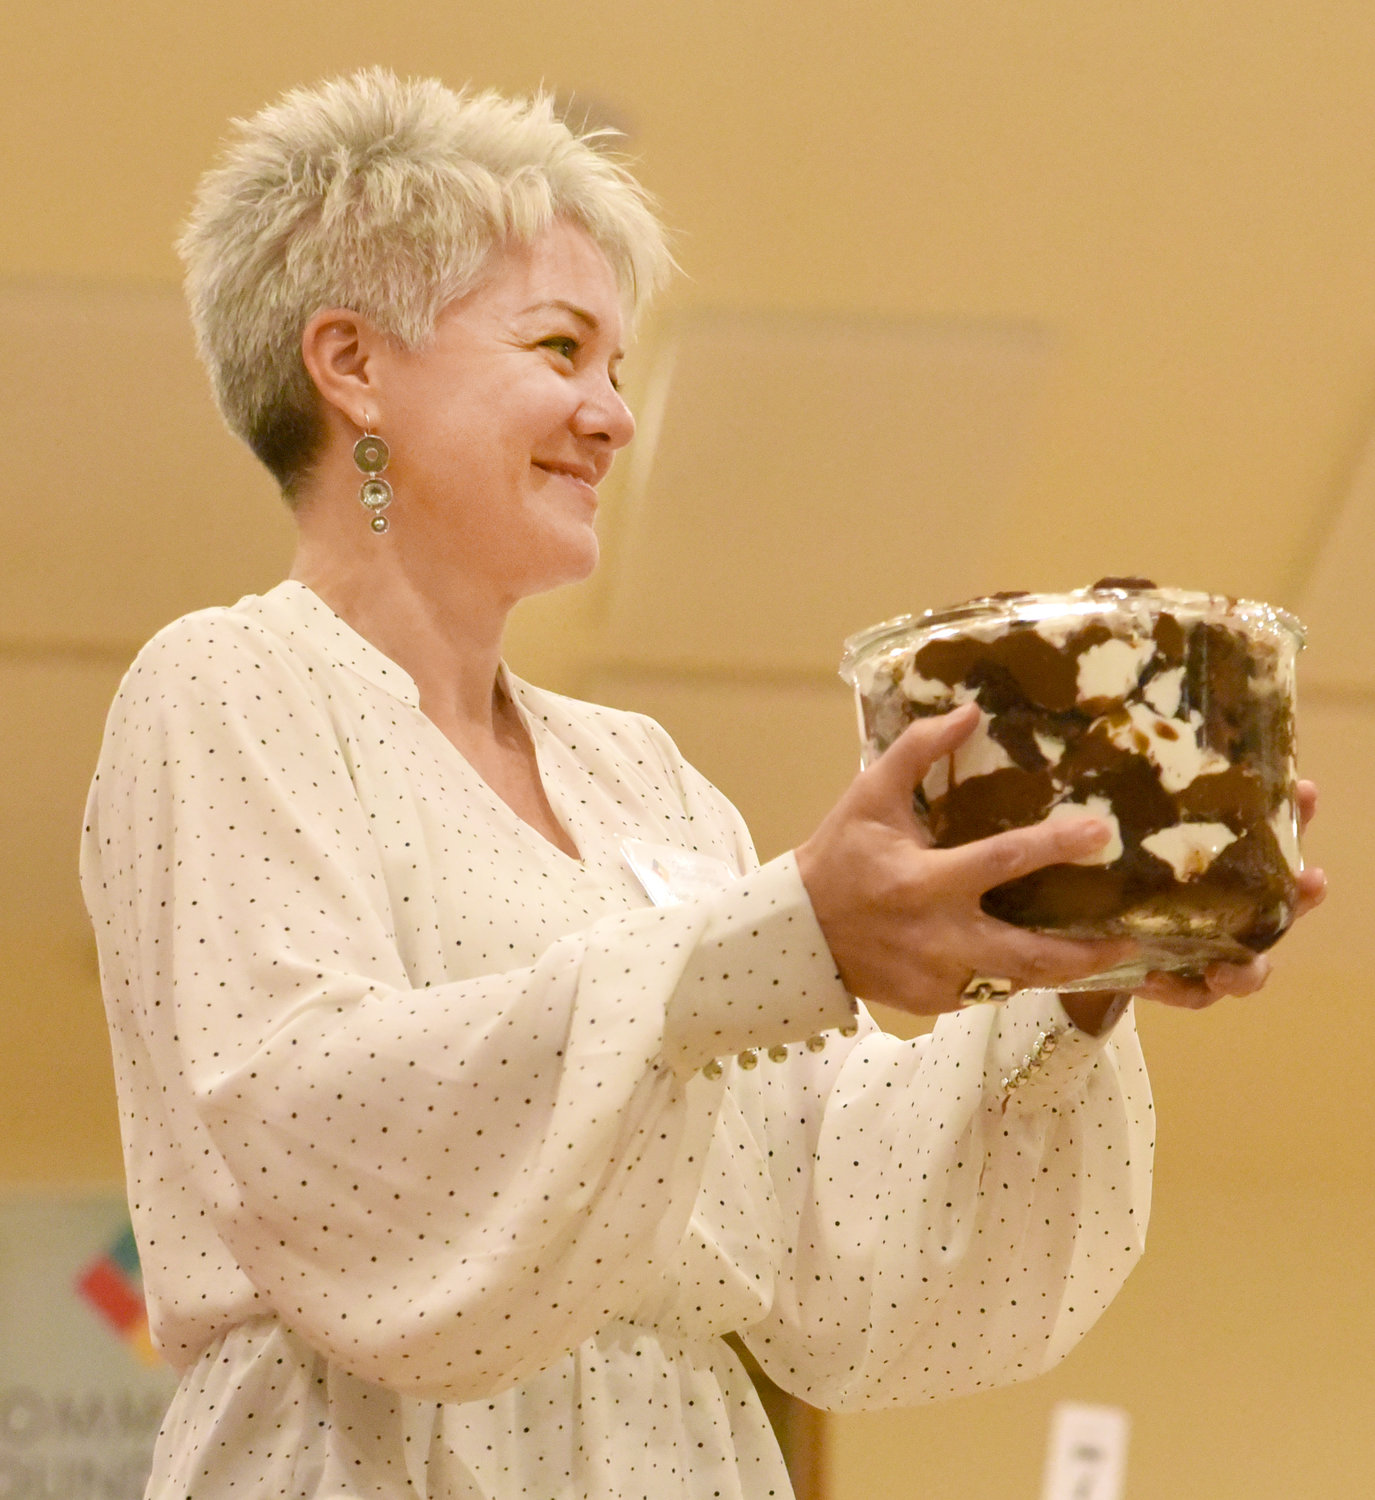 Heather Marek shows off a Chocolate Trifle Cake, donated by Mary Jane Schlabaugh-Gaffey, at the Washington County Community Foundation’s Chef Spotlight dinner on Nov. 4. Auctioneer Dwight Duwa gathered some laughs as he bid on the dessert while auctioning it off. Proceeds from the dessert auction benefitted both the foundation and the Kalona Historical Village.